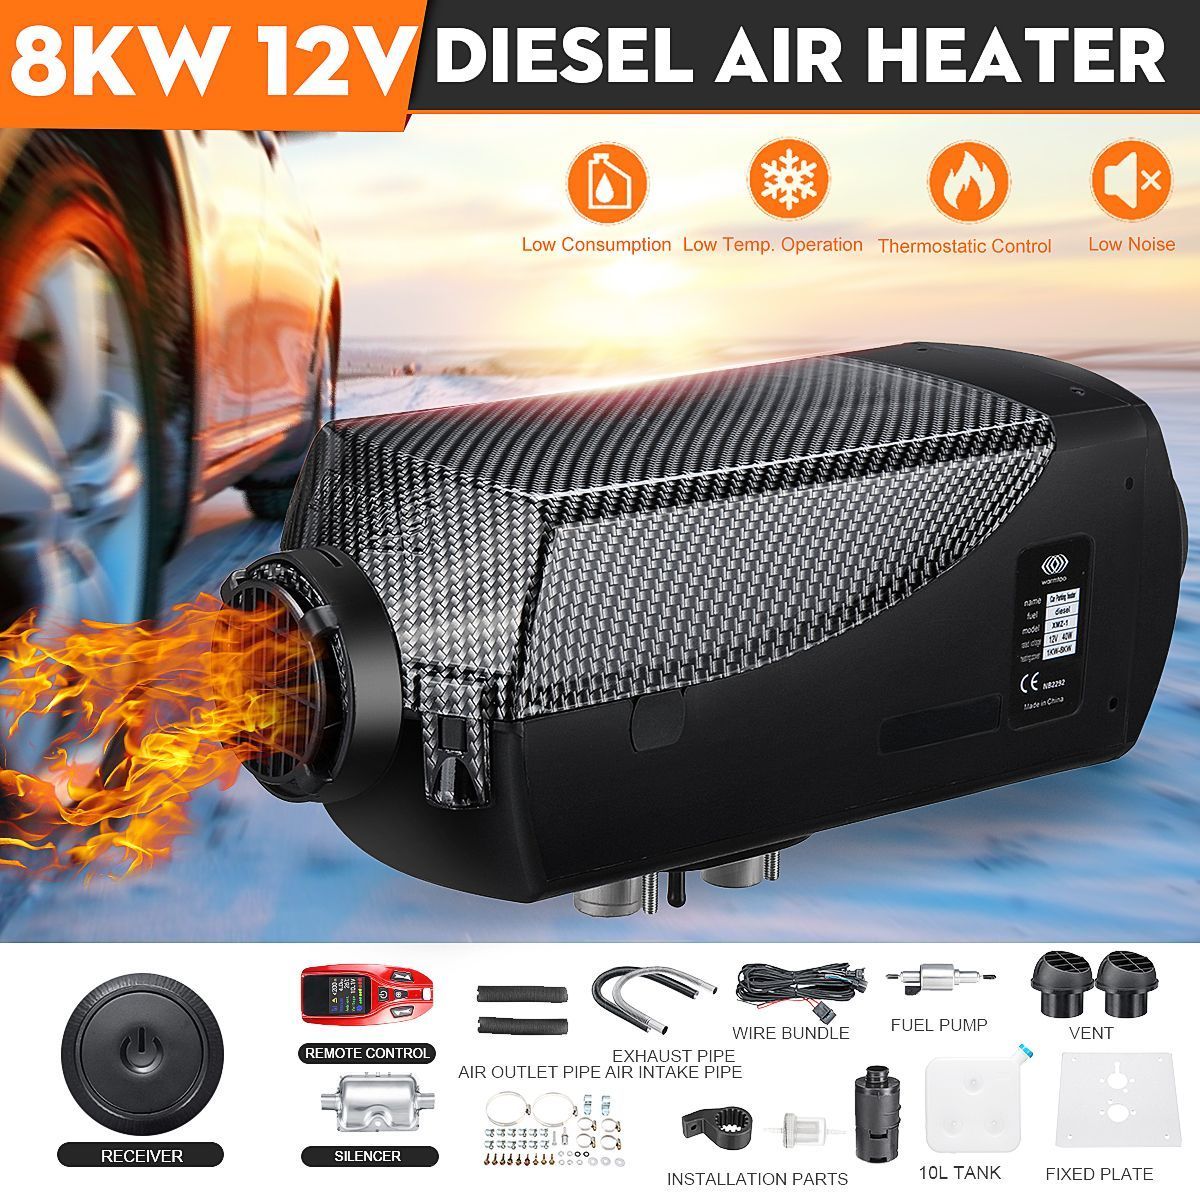 12V-8kw-Diesel-Car-Parking-Air-Heater-Black-Double-pipe-Three-way-RedBlue-Remote-Control-1600489